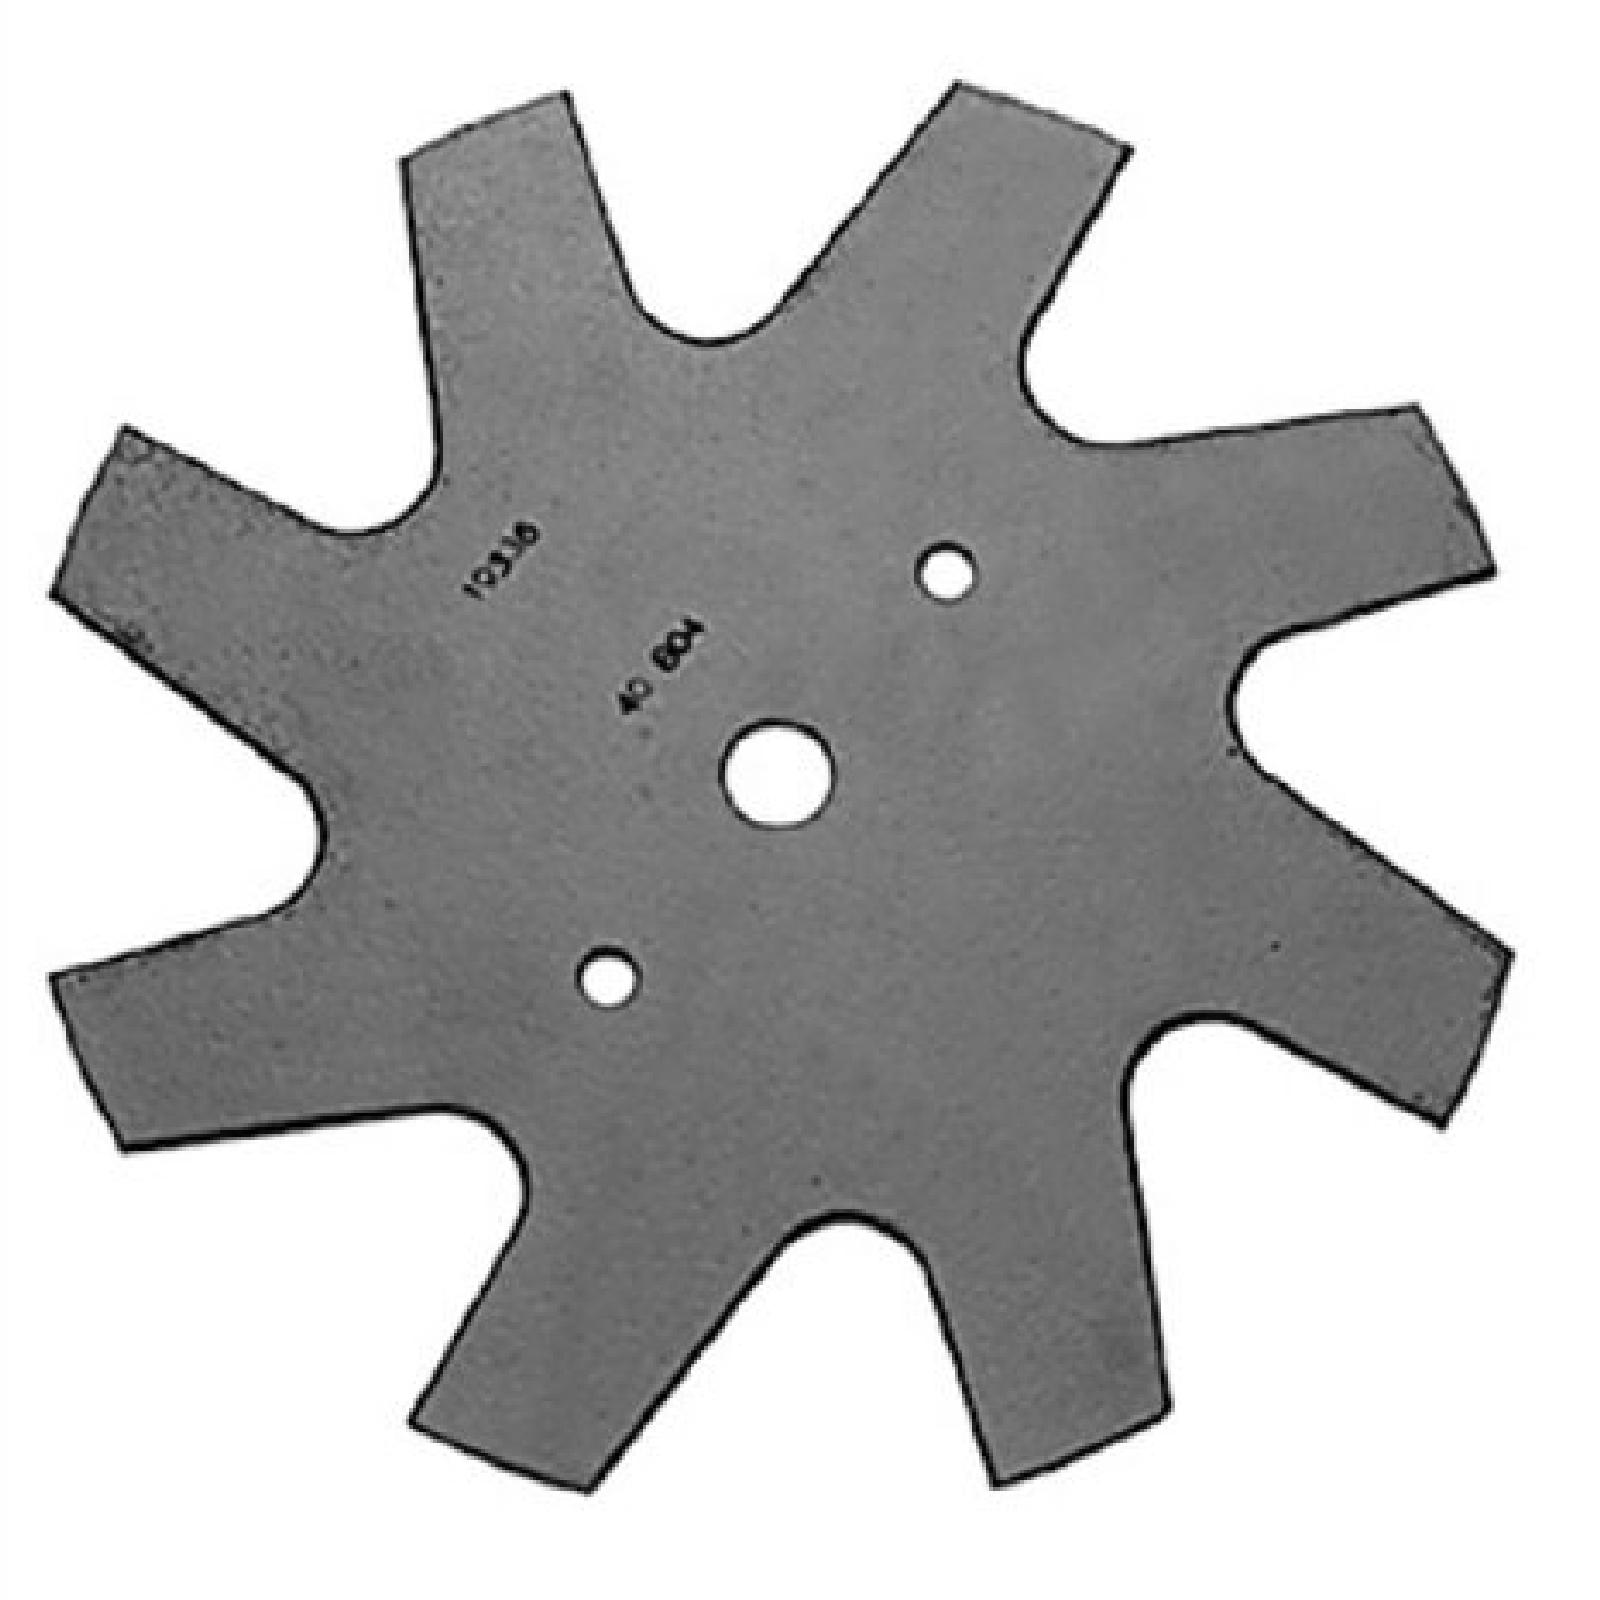 EDGER BLADE, 9IN X 1/2IN part# 40-807 by Oregon - Click Image to Close